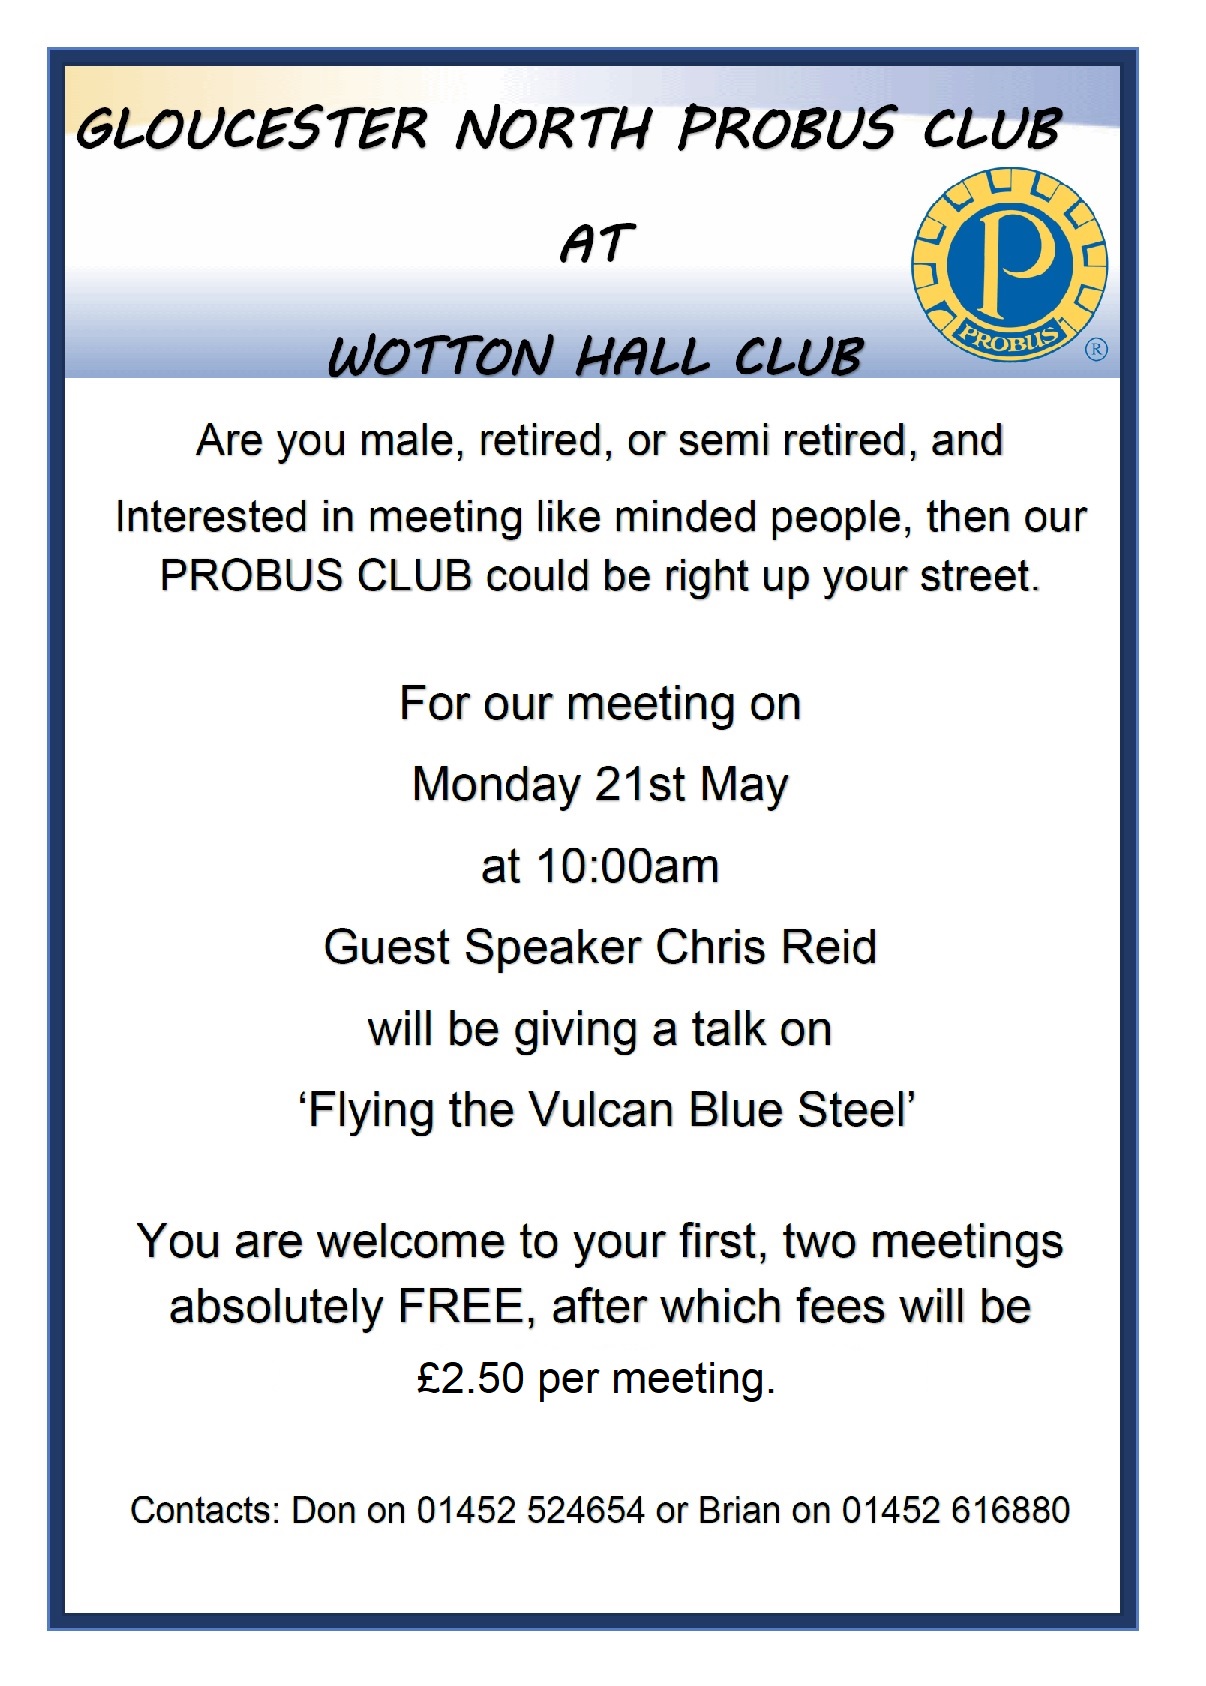 MAY 21ST 2018 GLOS NORTH PROBUS CLUB EVENT